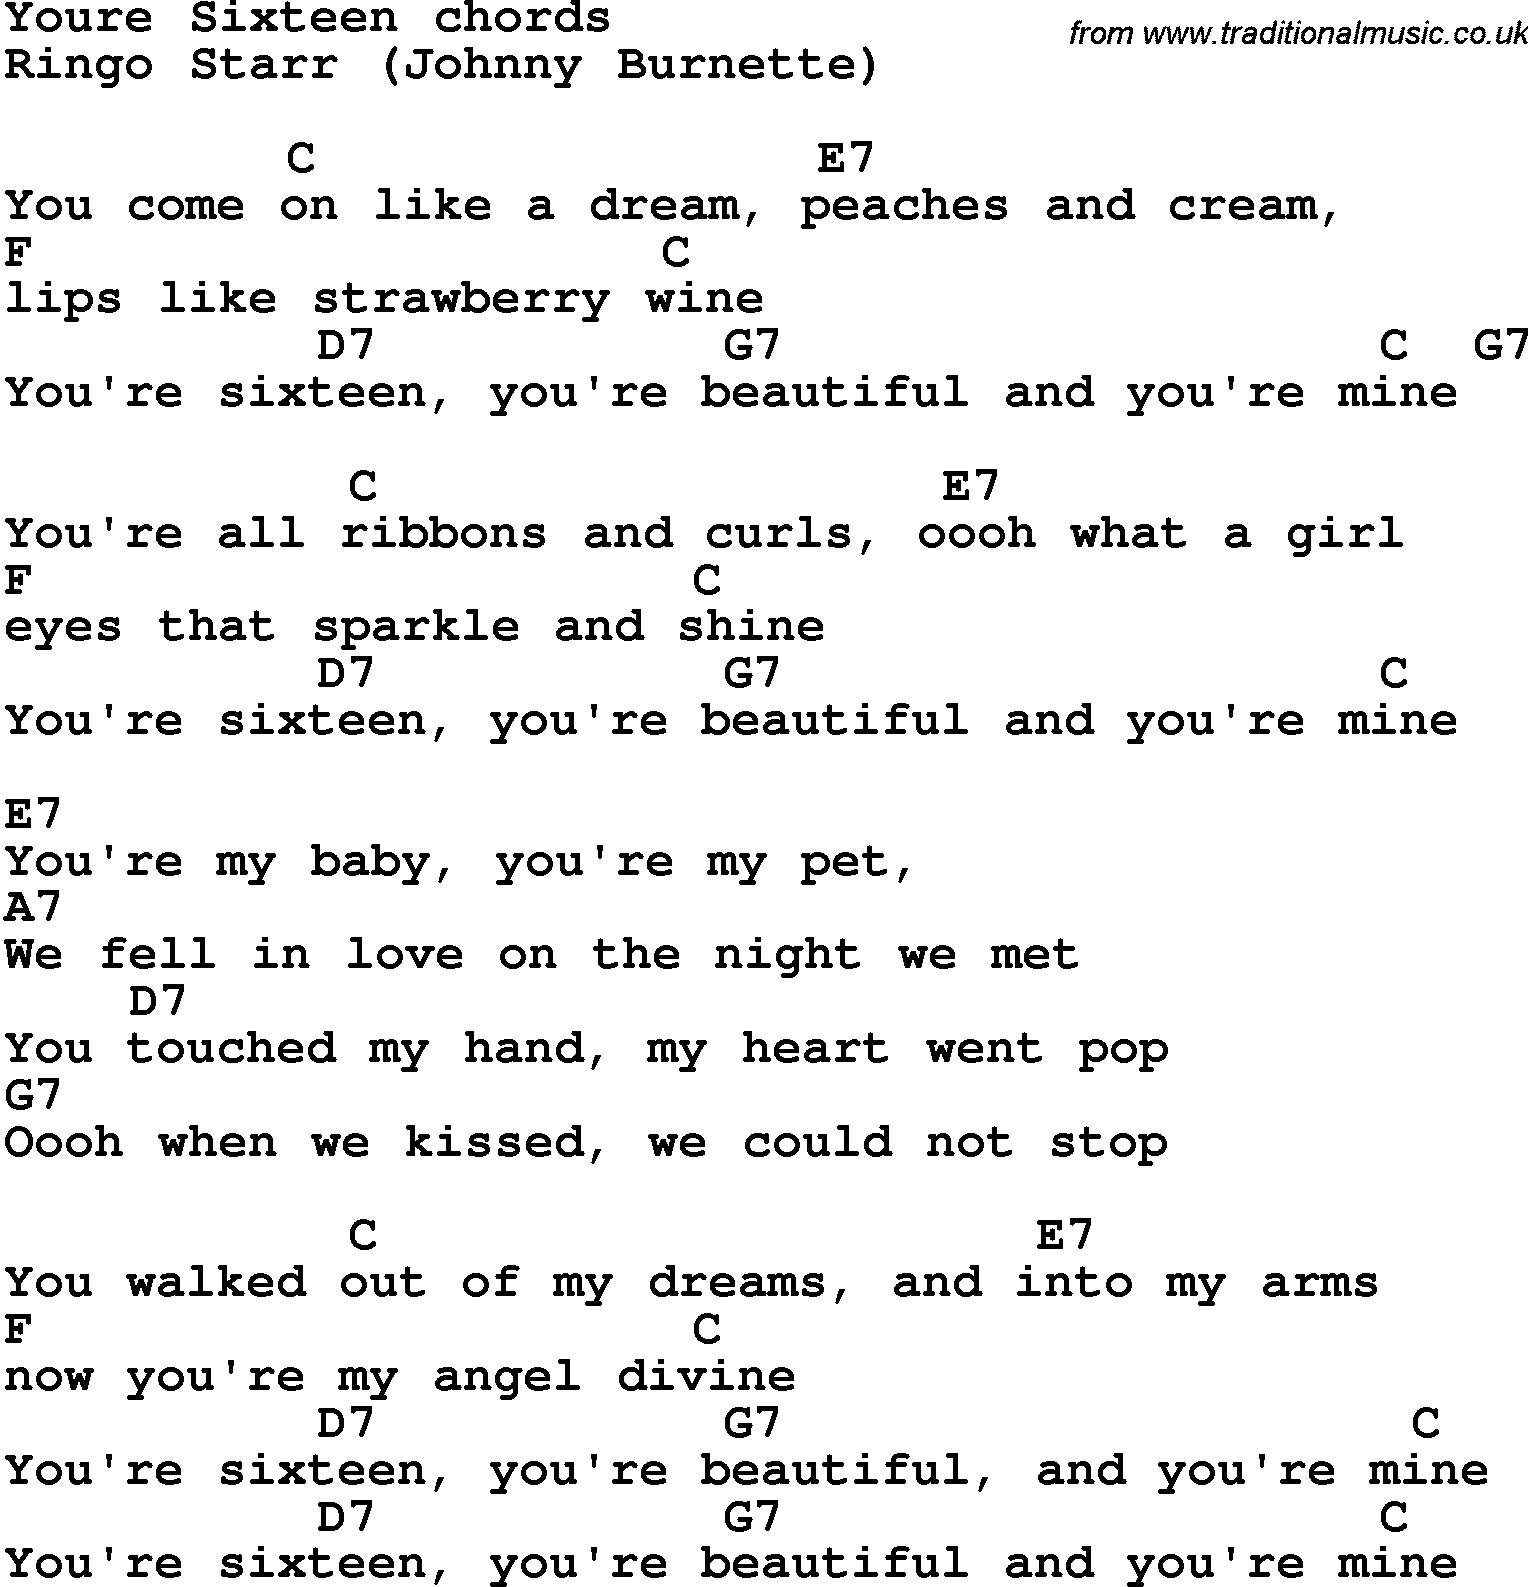 Song Lyrics with guitar chords for You're Sixteen - Ringo Starr